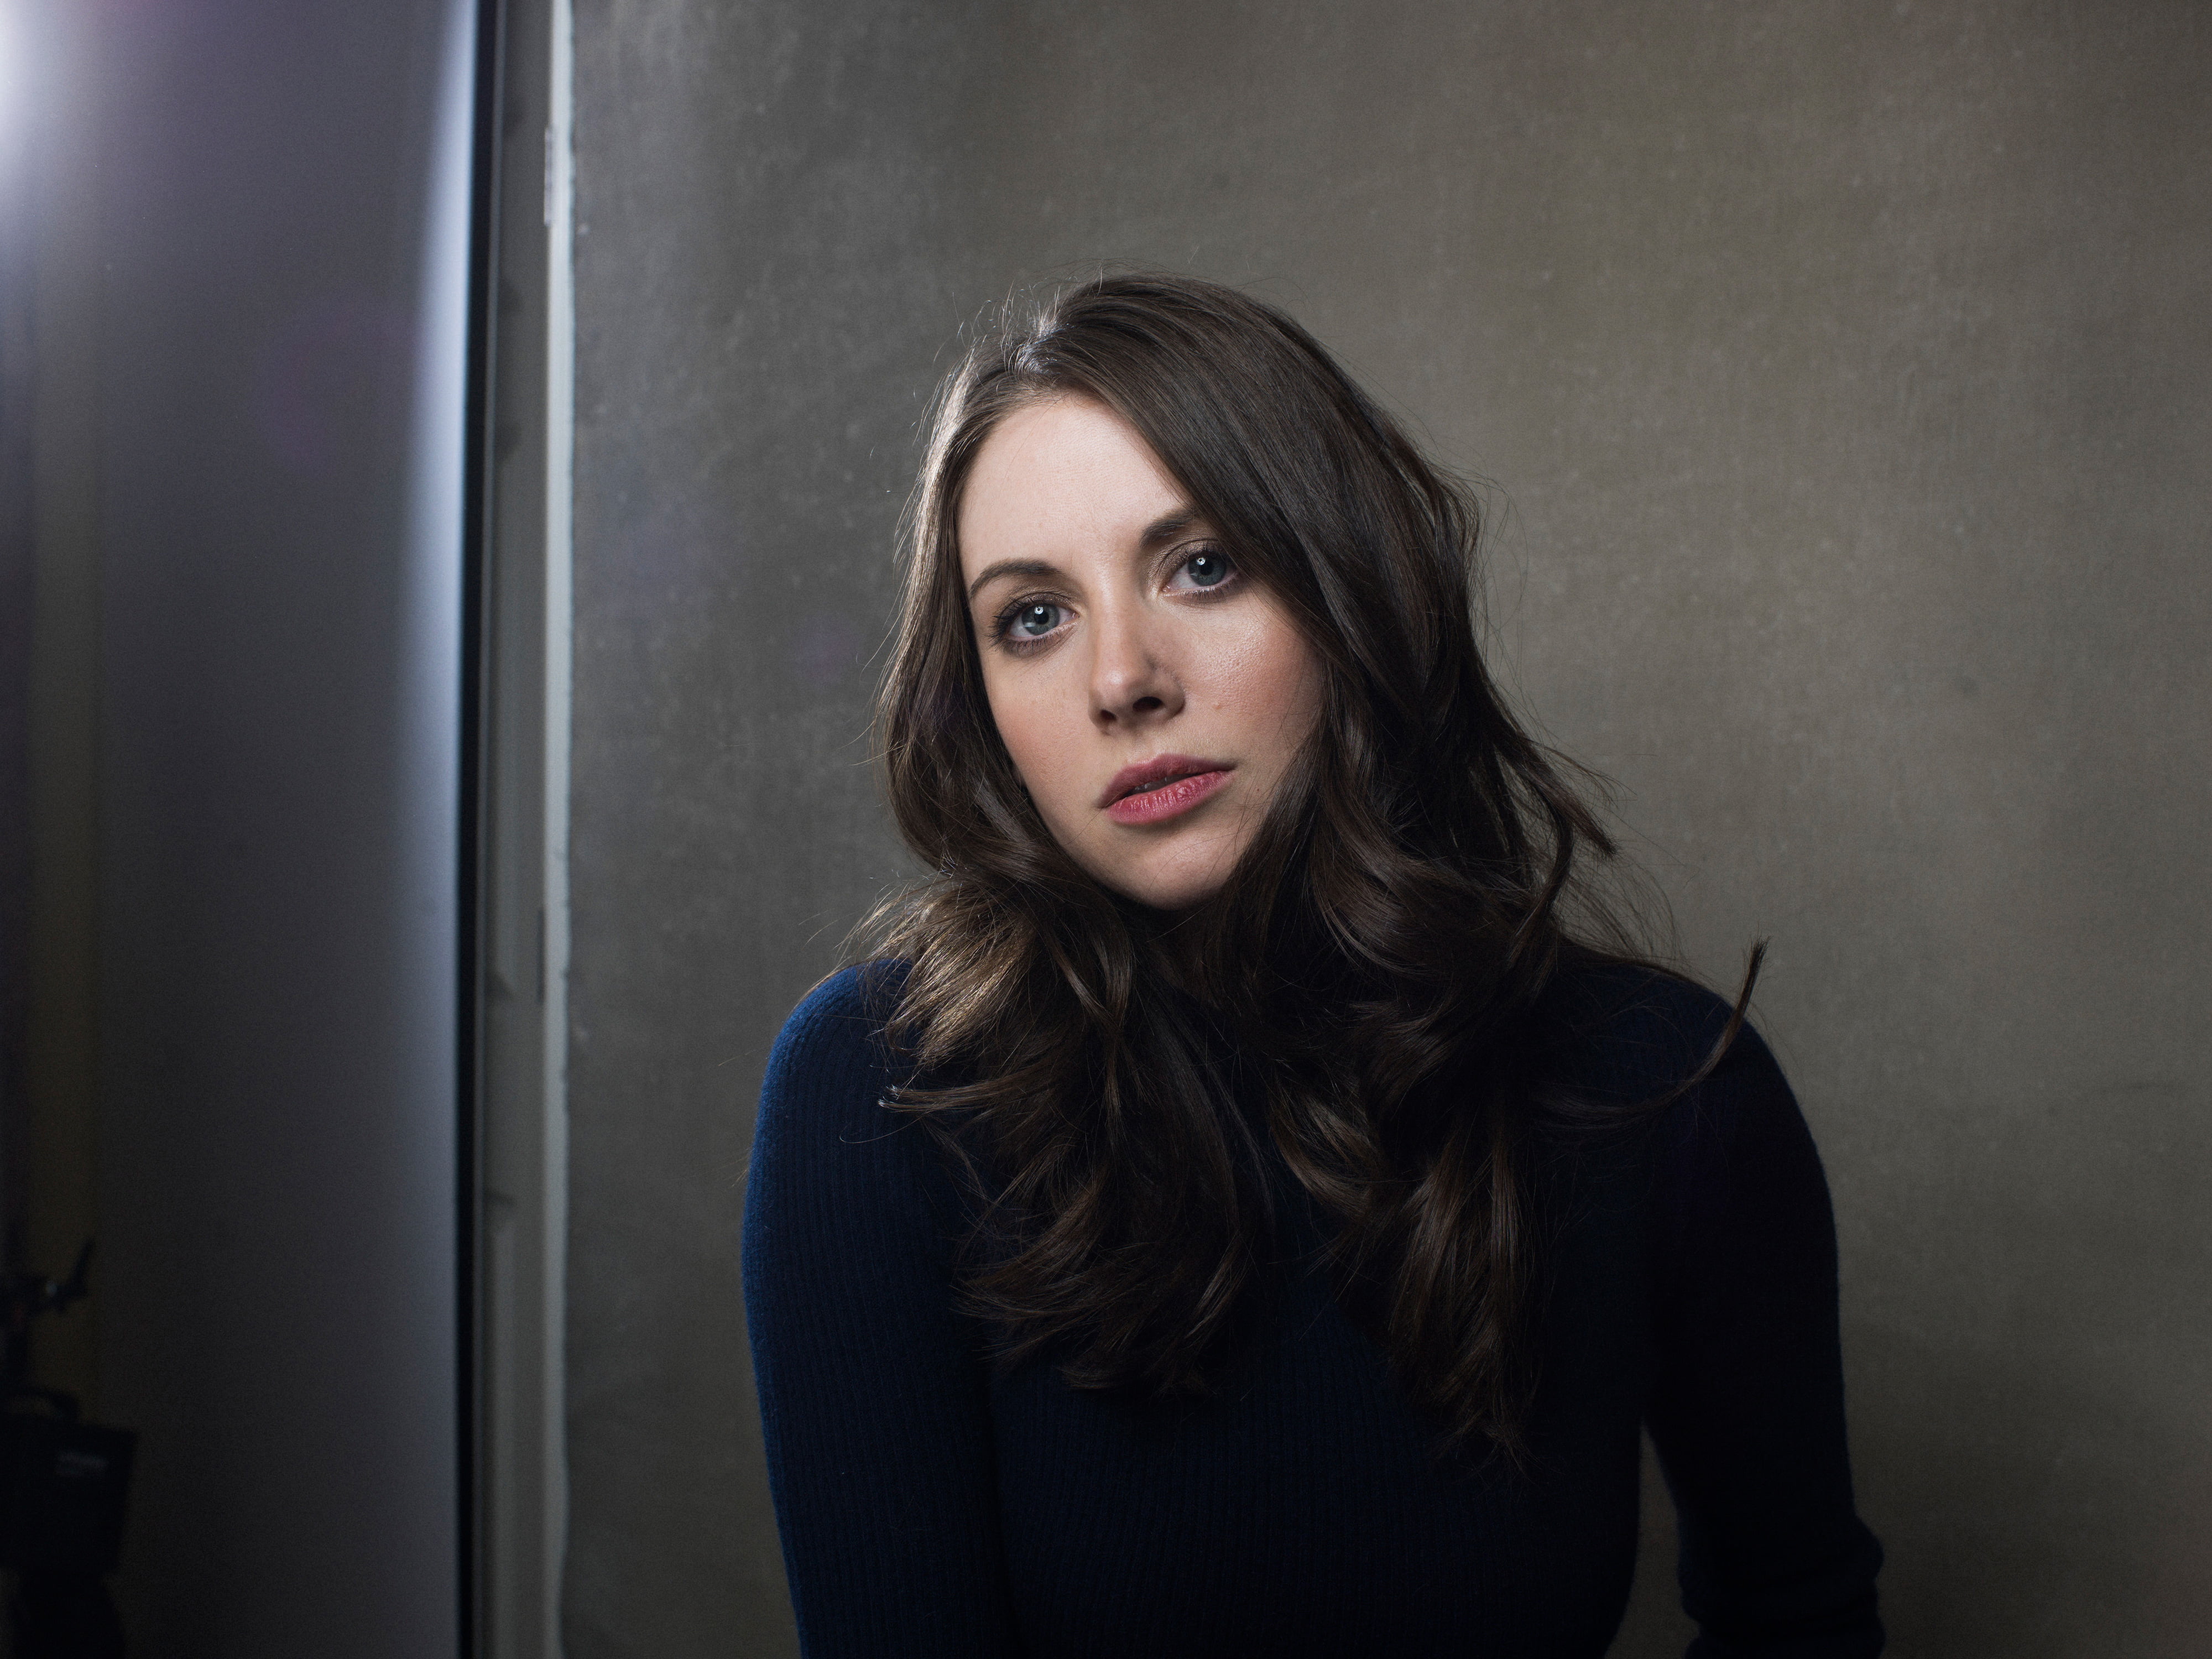 alison brie, celebrities, girls, 4k, portrait, one person, young adult